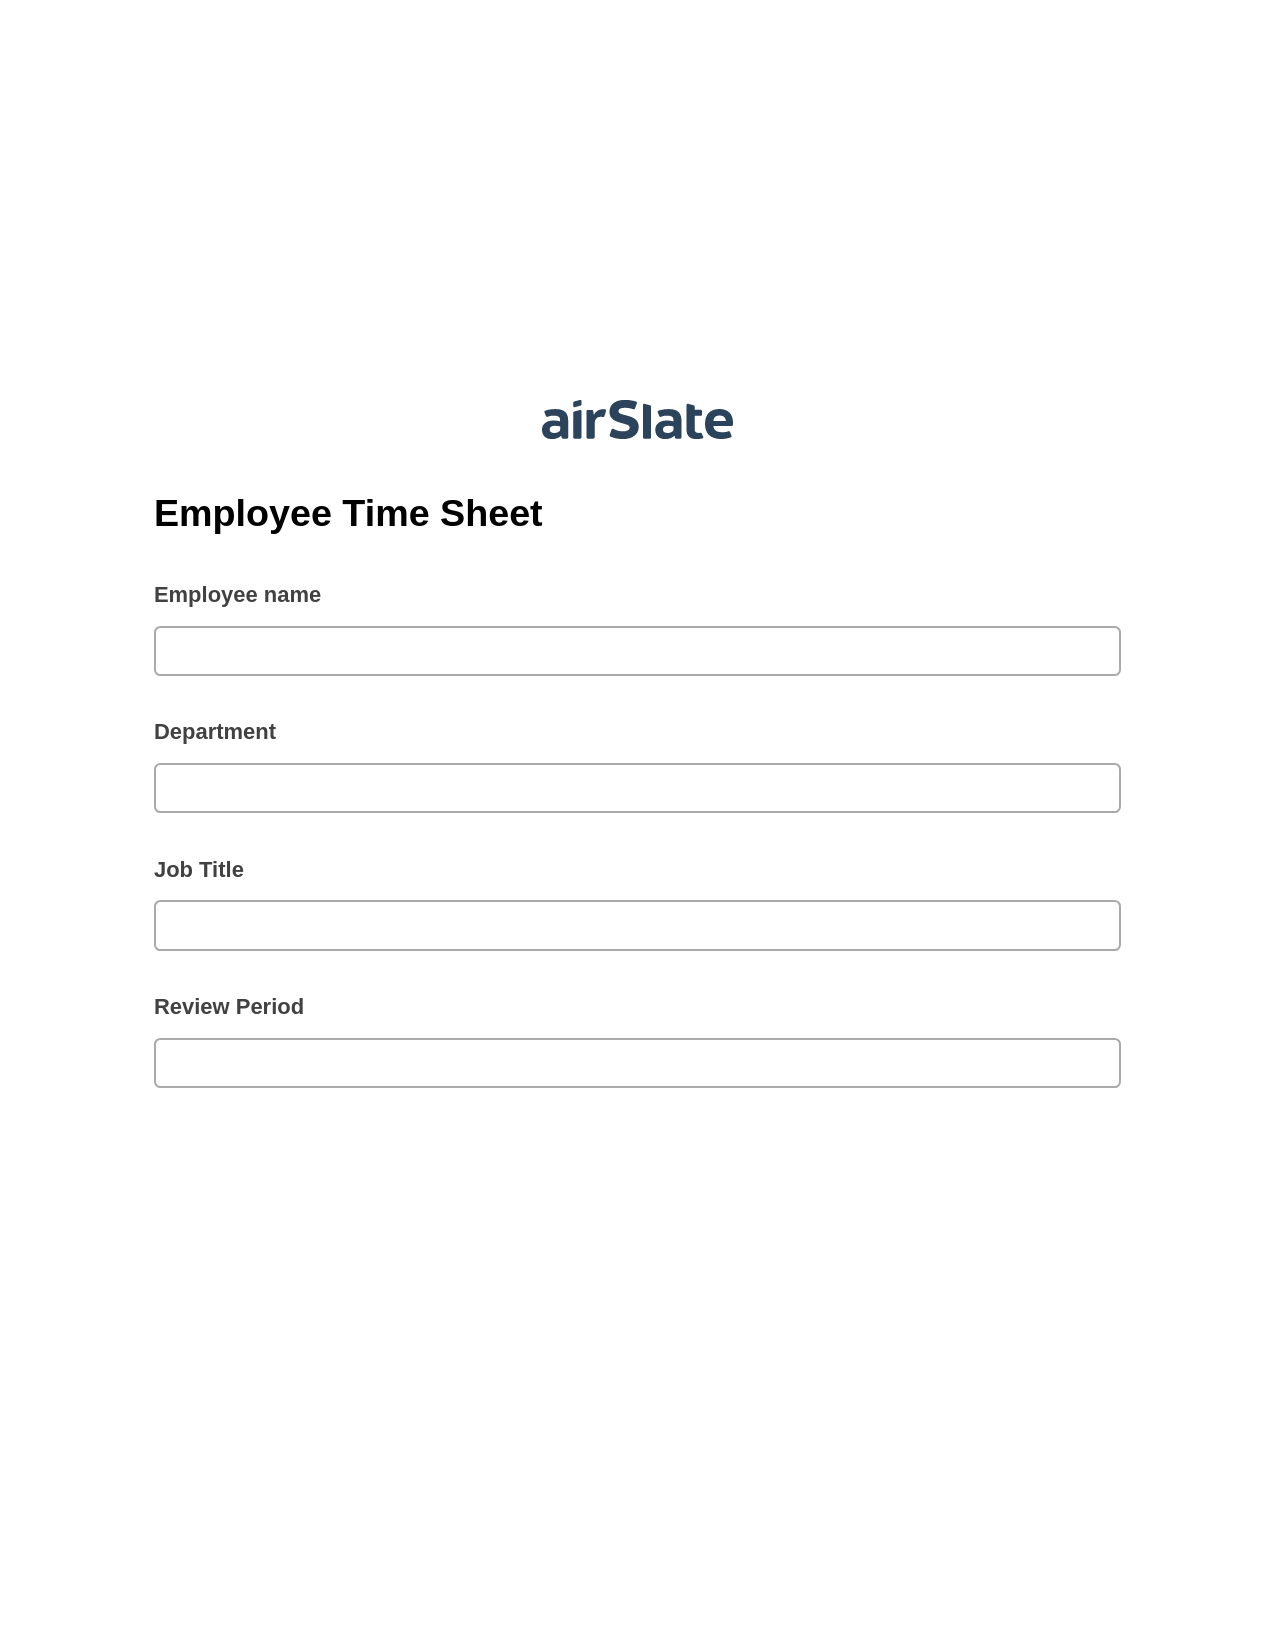 Employee Time Sheet Pre-fill from MS Dynamics 365 Records, Update Audit Trail Bot, Export to Google Sheet Bot